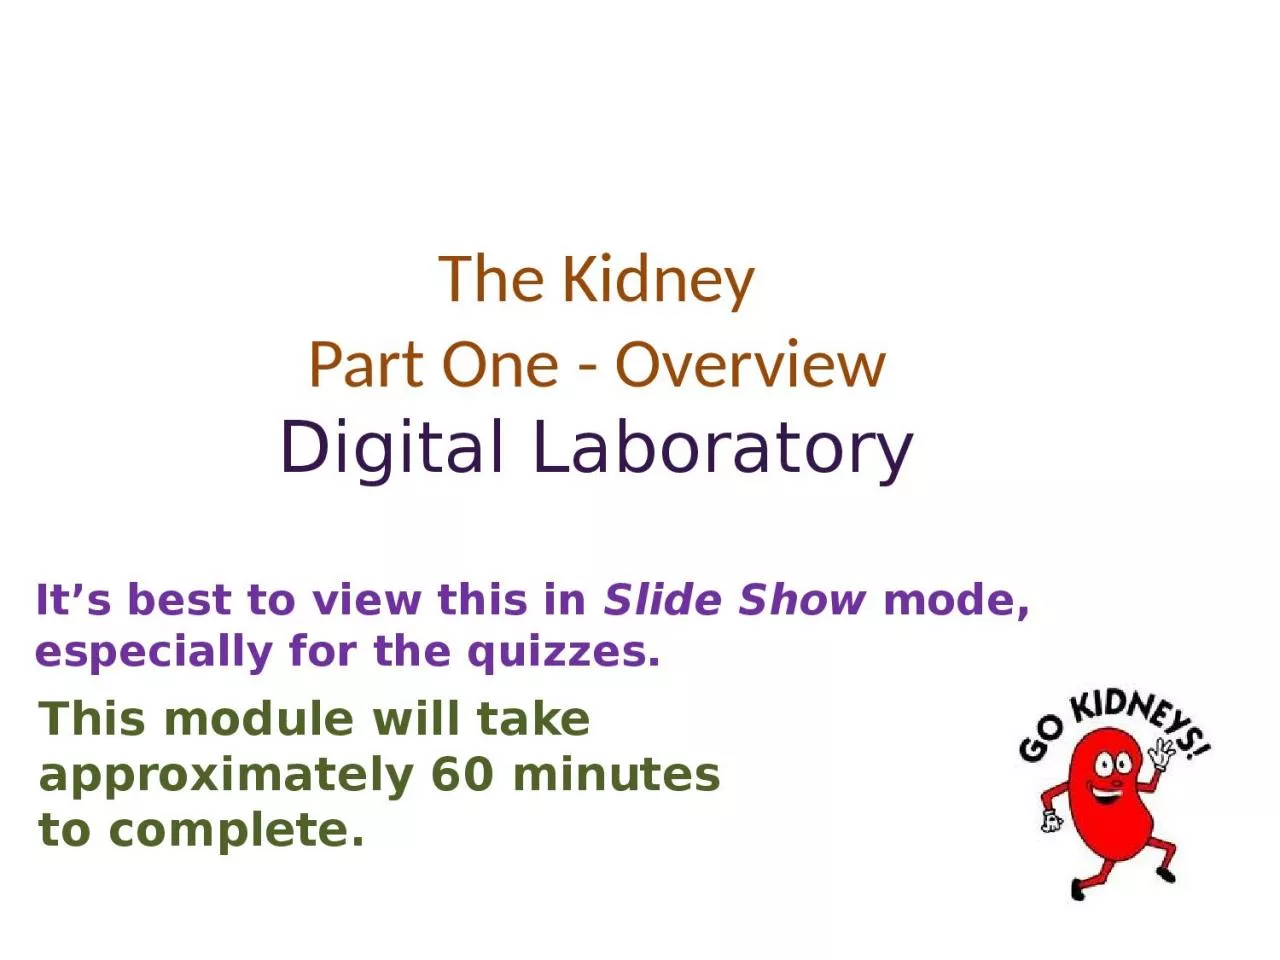 The Kidney Part One - Overview